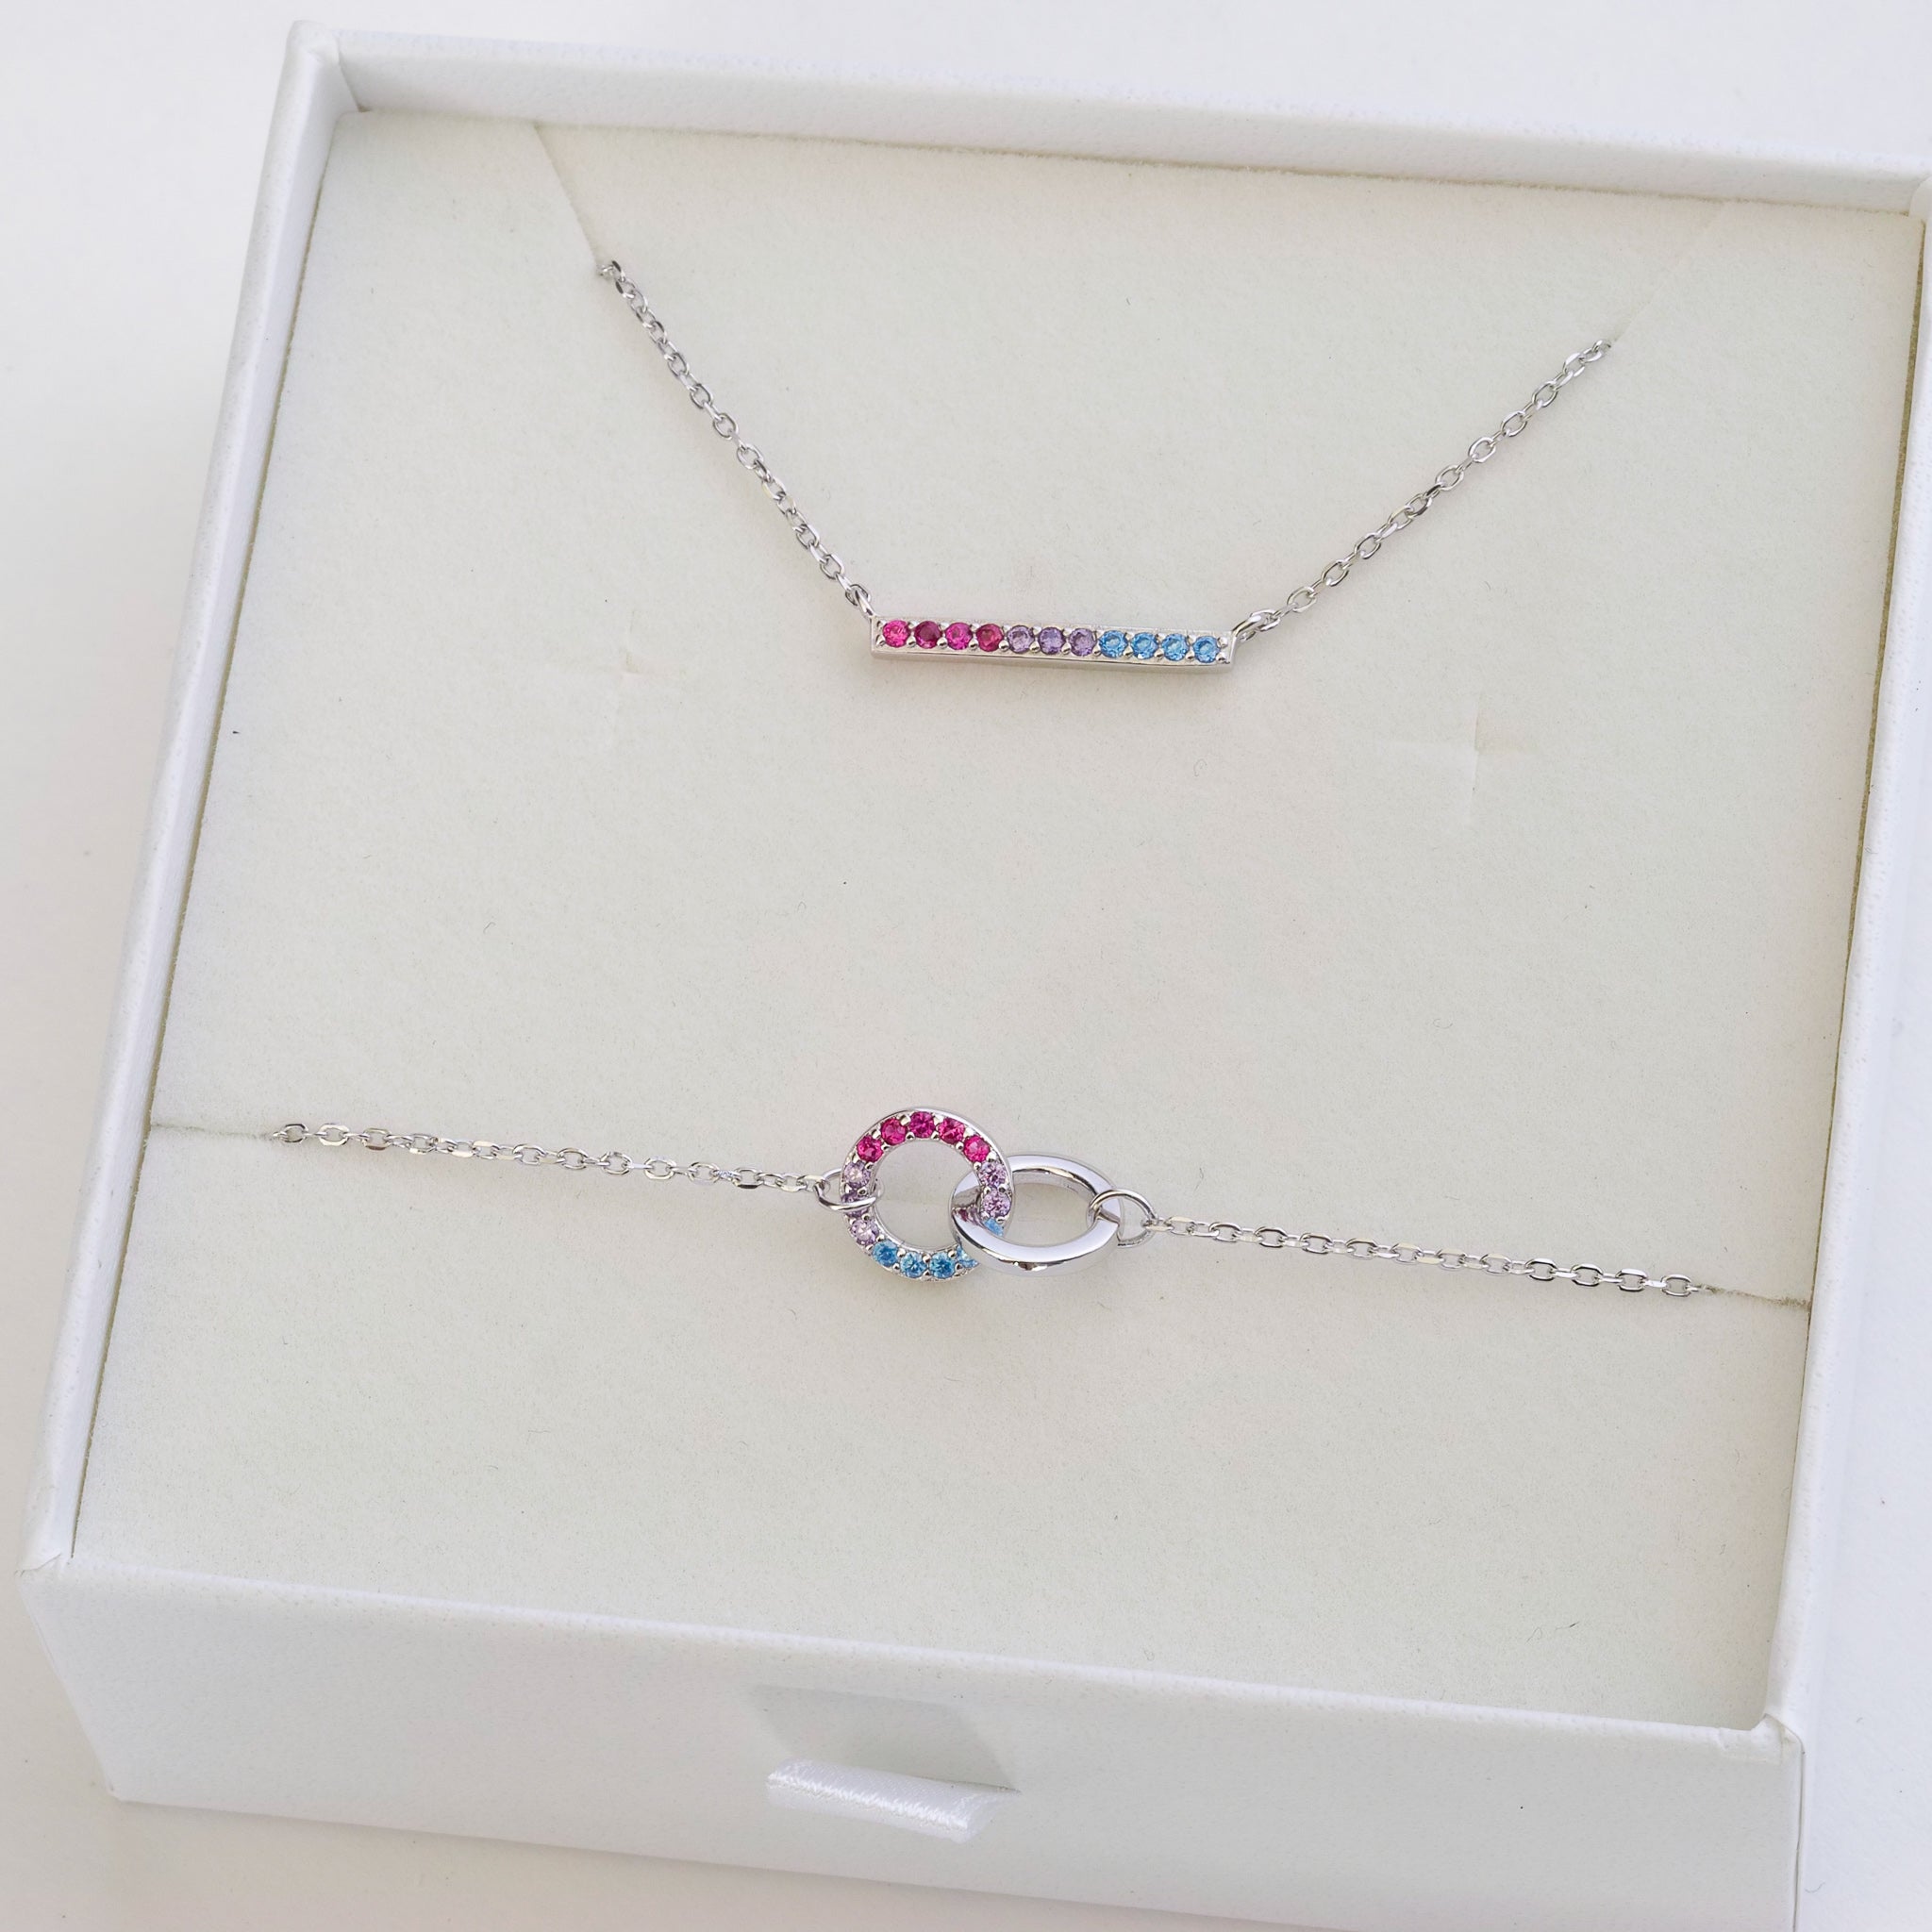 Bisexual Jewellery set with bisexual bracelet and bisexual necklace featuring colours of bisexual flag - silver